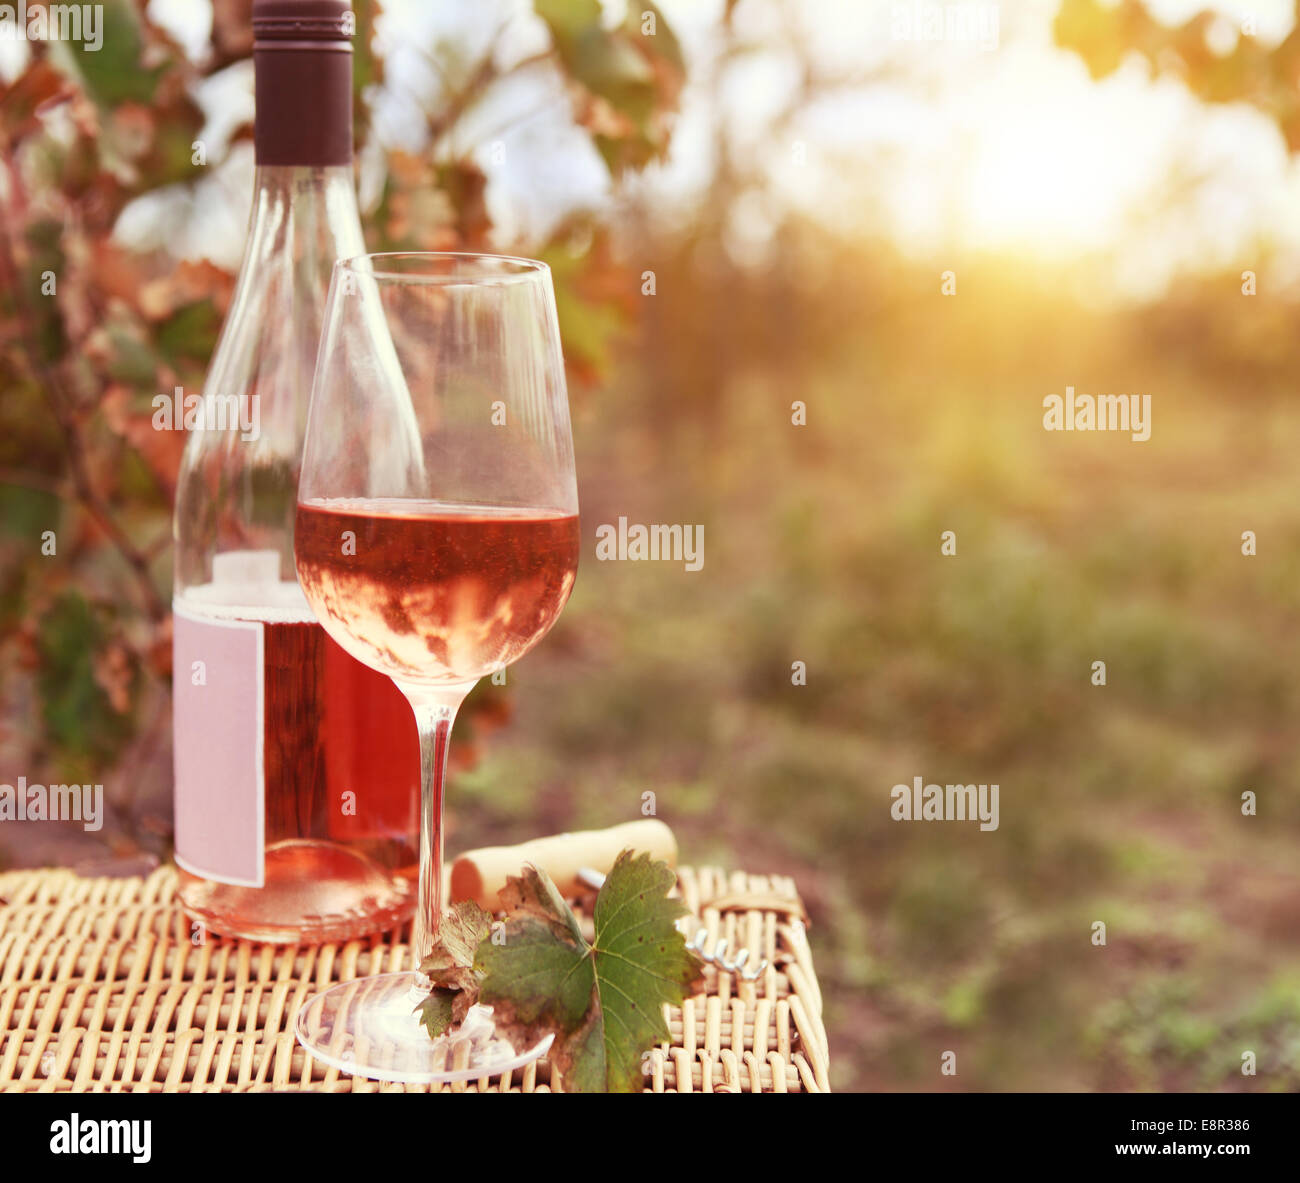 One glass and bottle of the rose wine in autumn vineyard. Harvest time Stock Photo